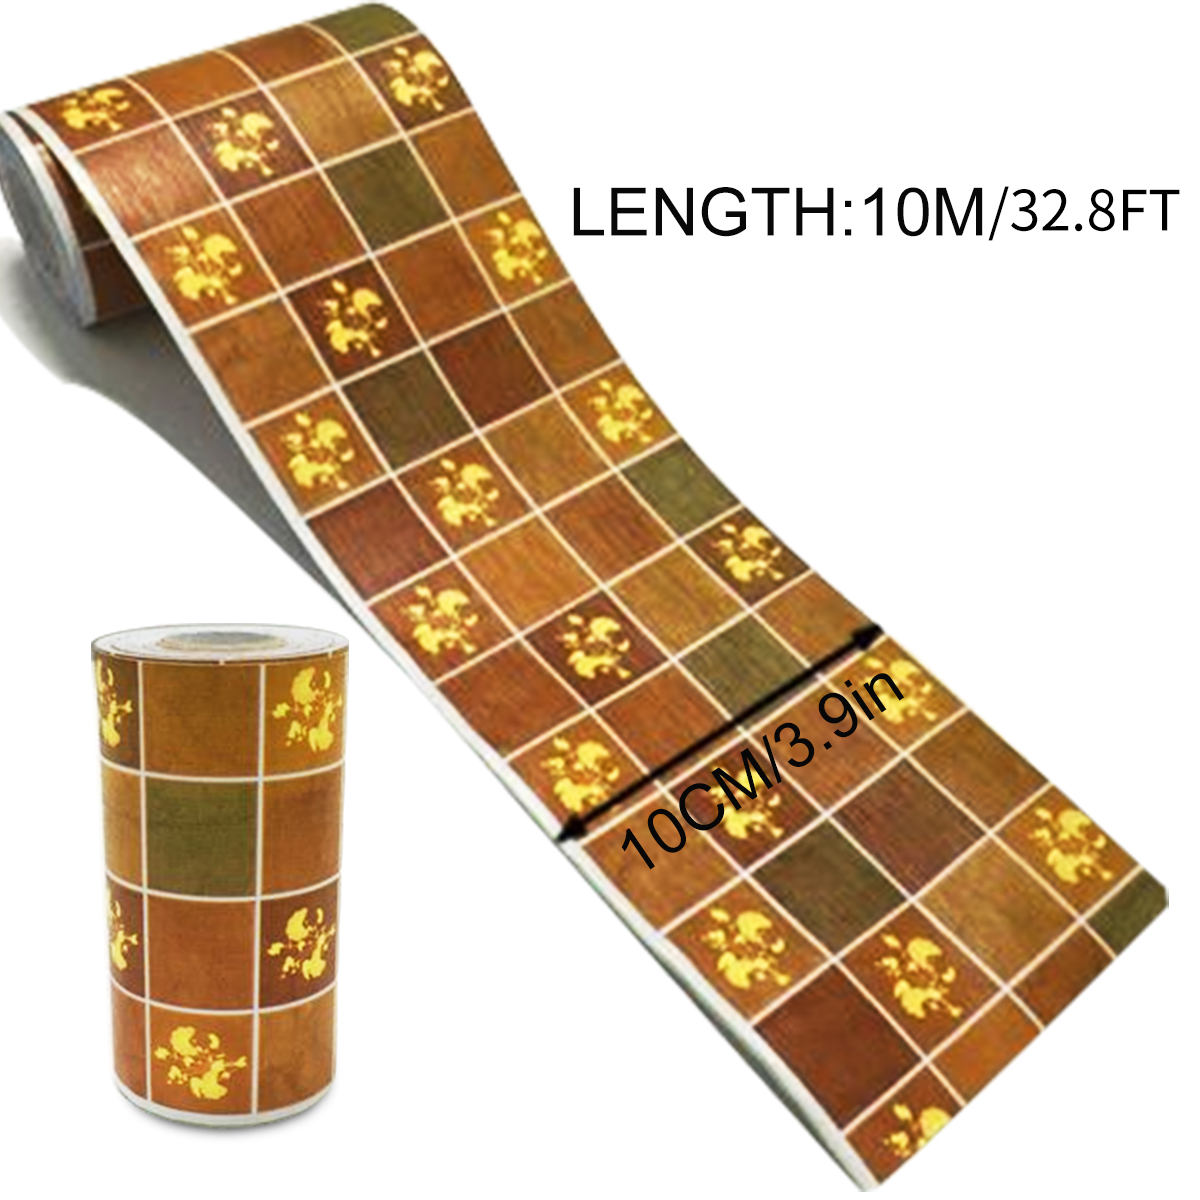 3D-Self-Adhesive-Waterproof-Wallpaper-Border-Peel-and-Stick-for-Bathroom-Kitchen-Counter-Top-Tiles-S-1725407-2